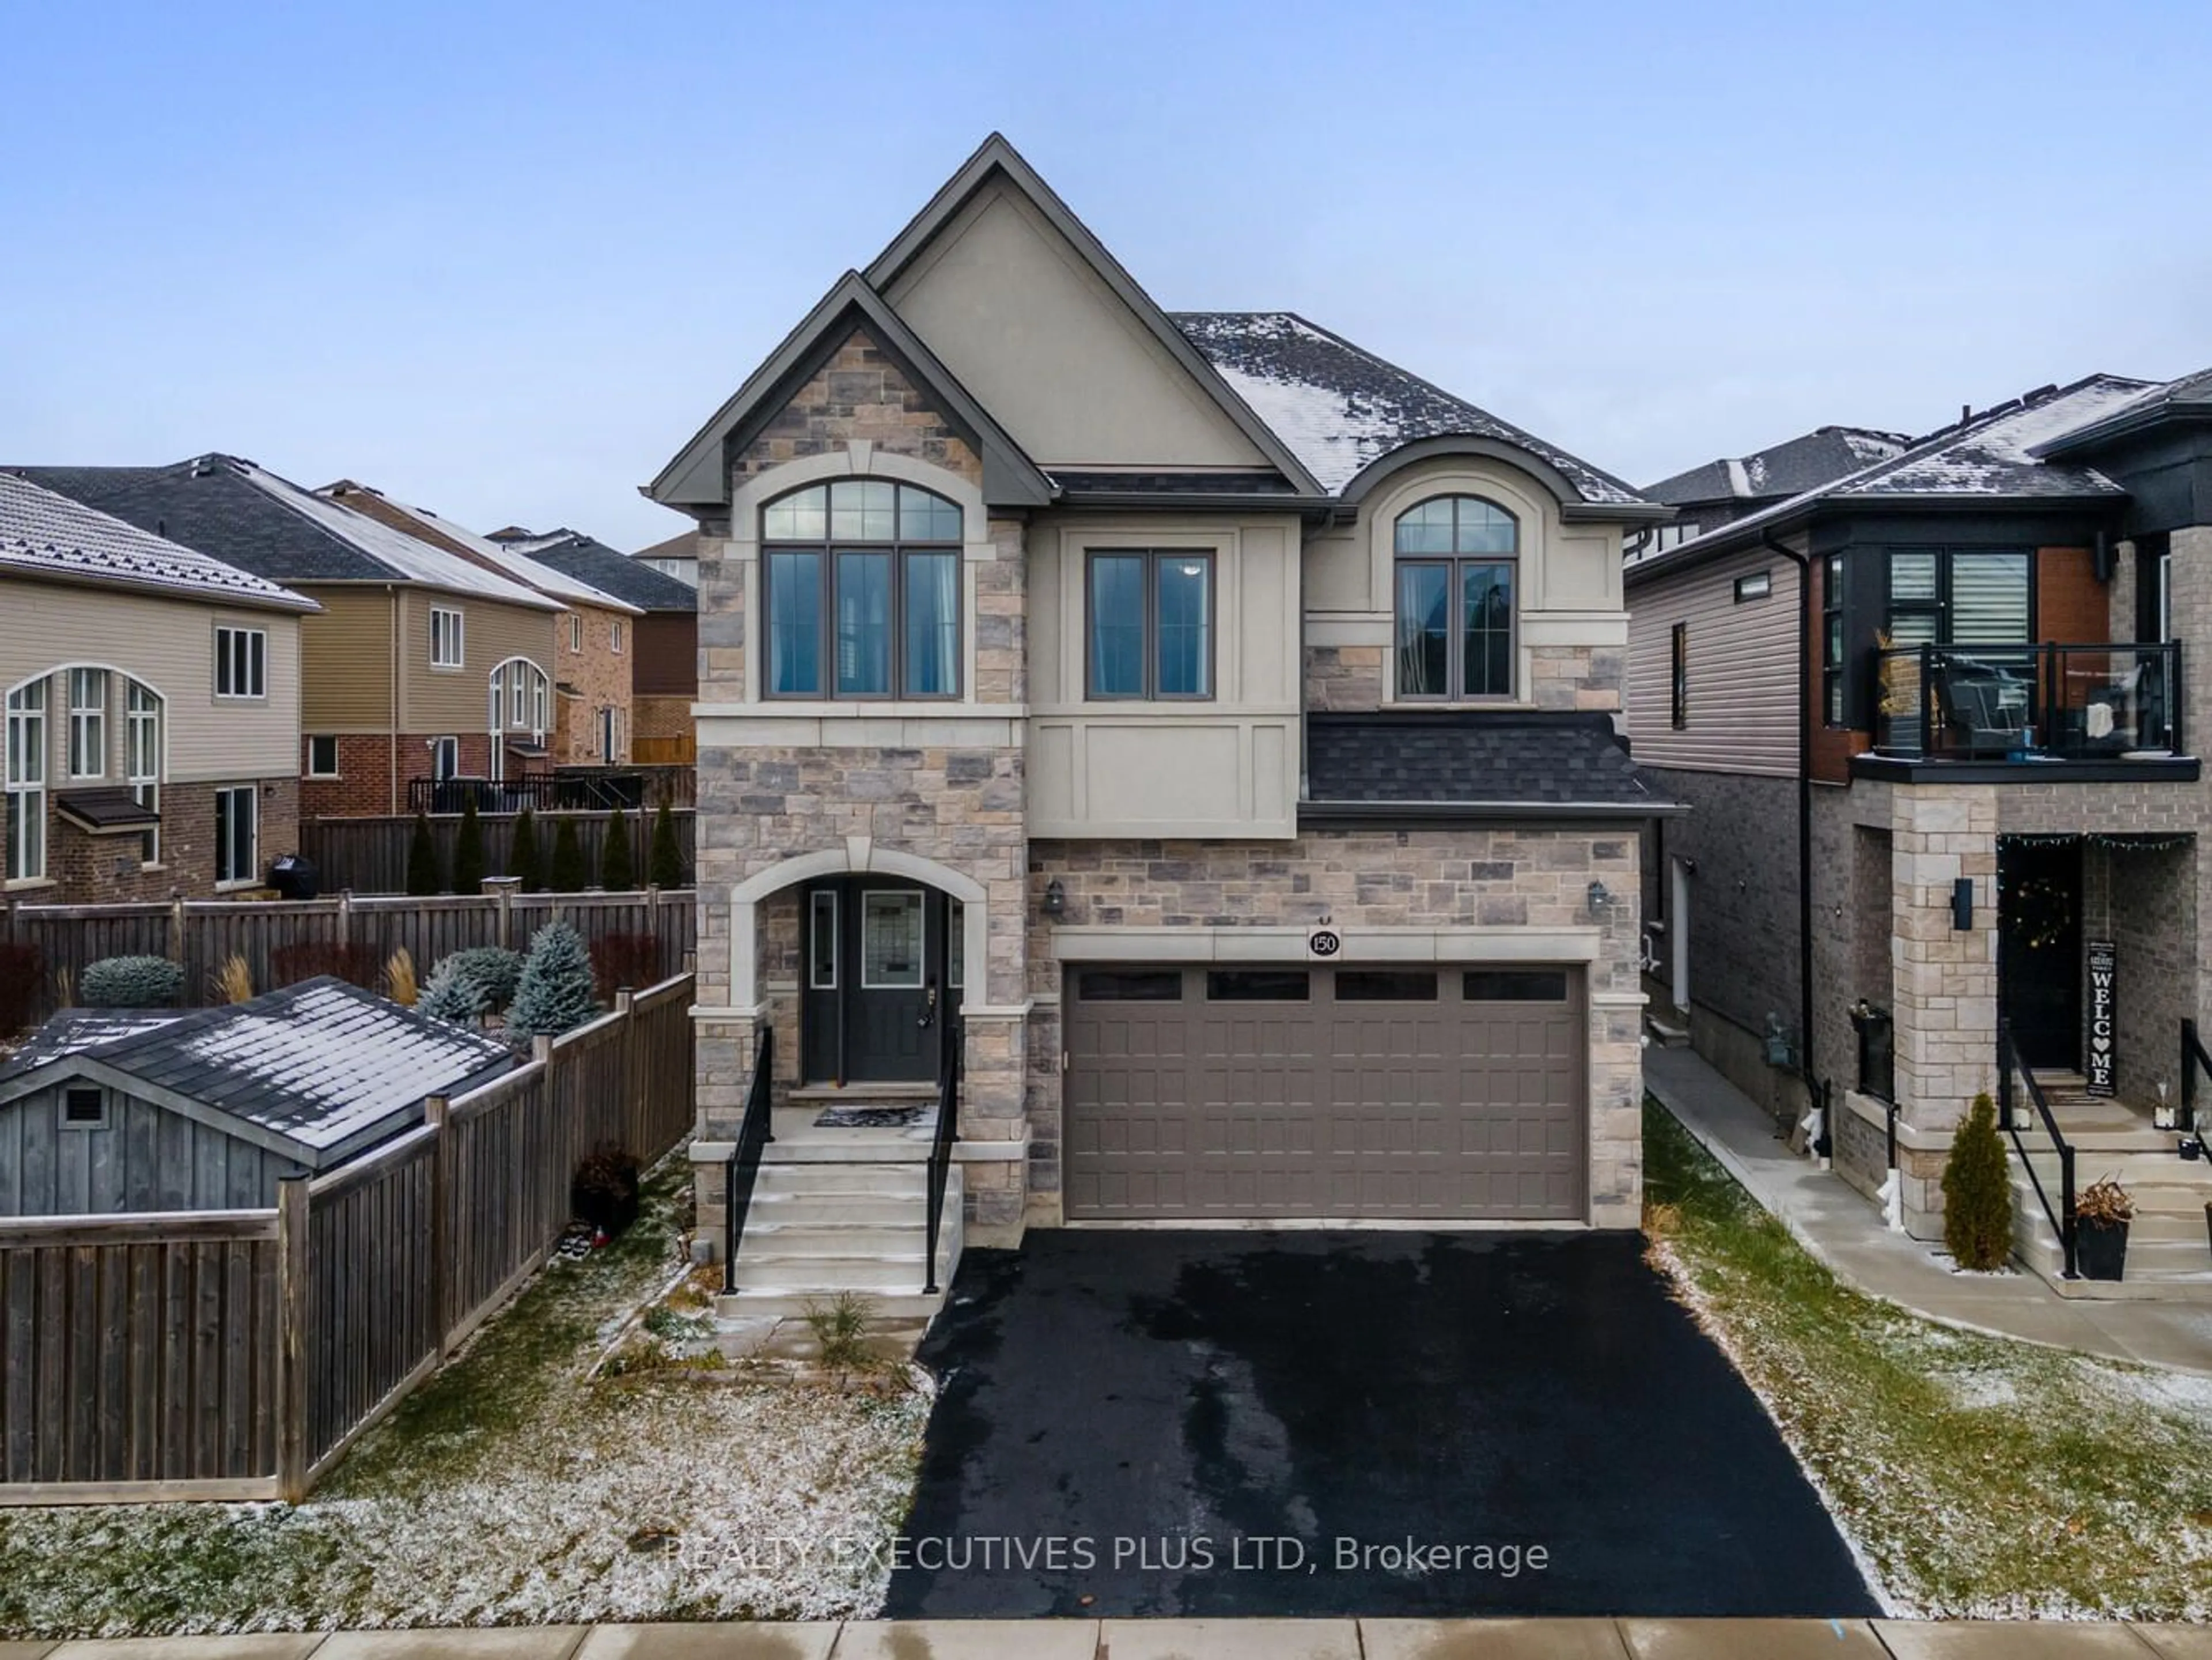 Frontside or backside of a home for 150 Blair Creek Drive Dr, Kitchener Ontario N2P 0C2